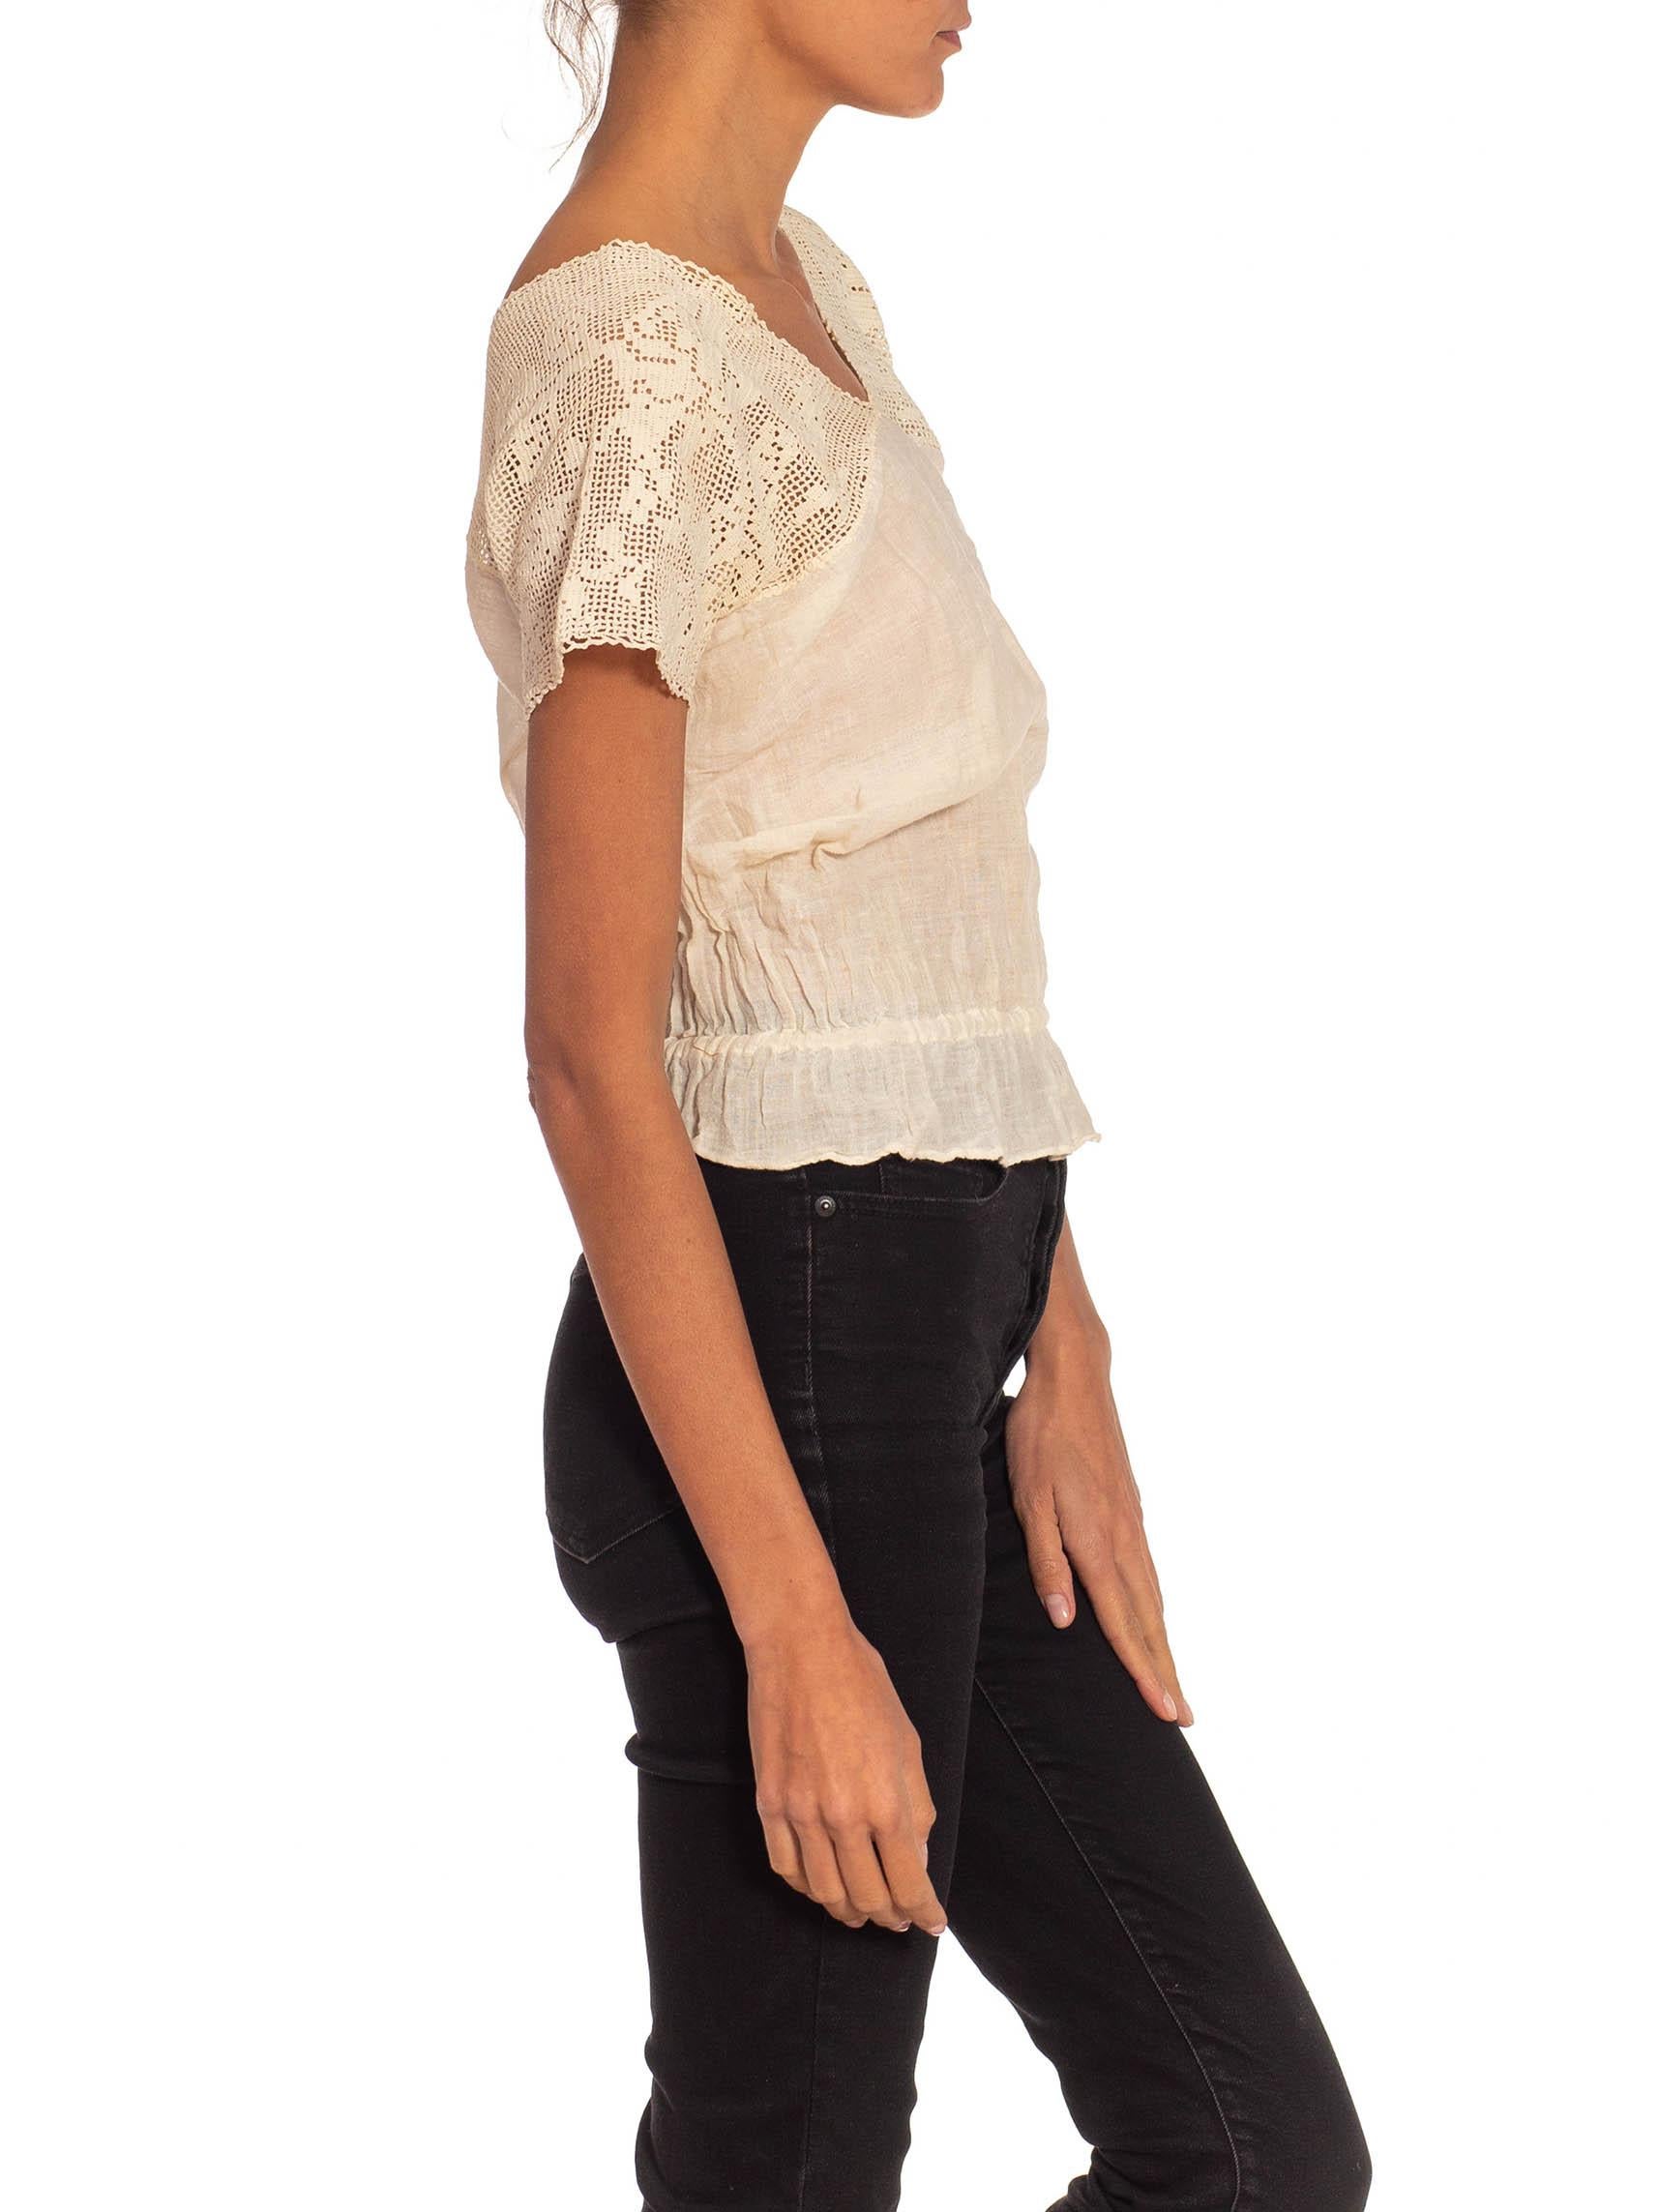 Women's Victorian Off White Cotton Lace Top With Elastic Waist For Sale